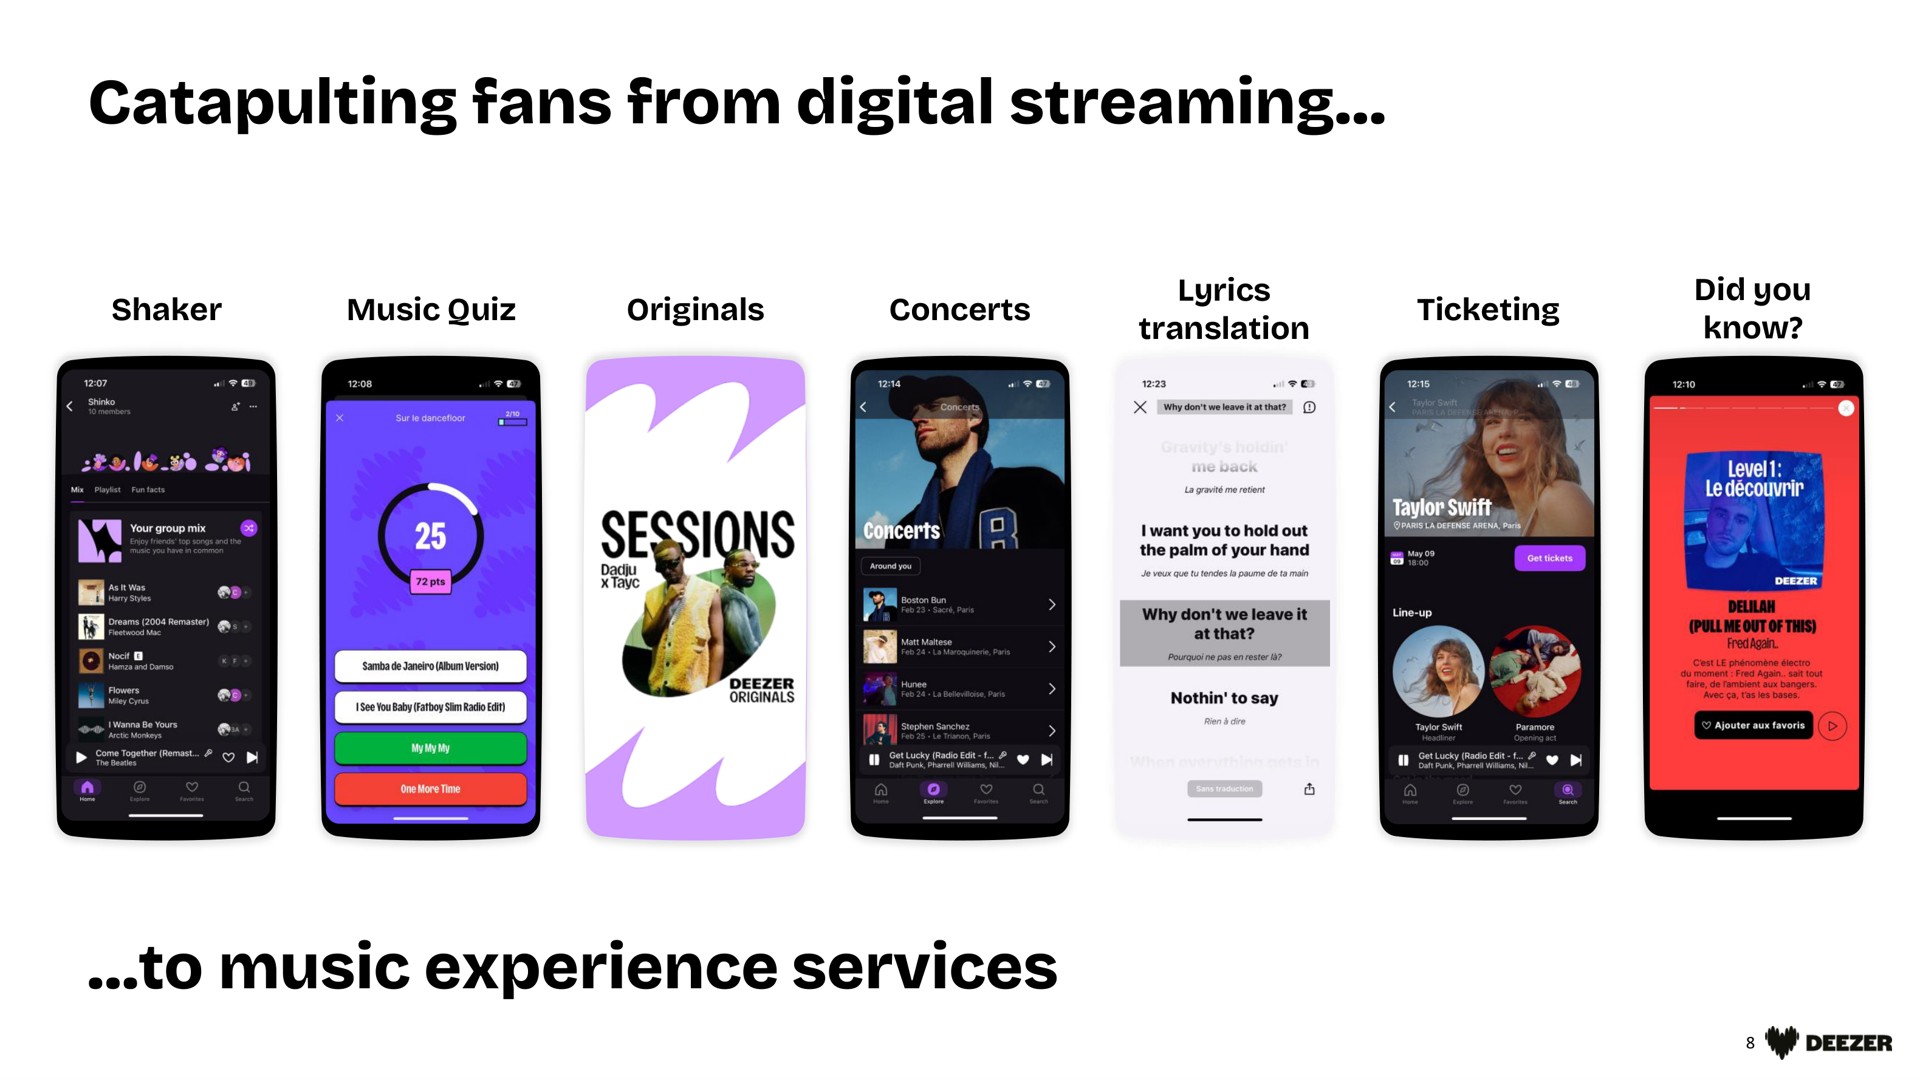 catapulting fans from digital streaming to music experience services | Deezer